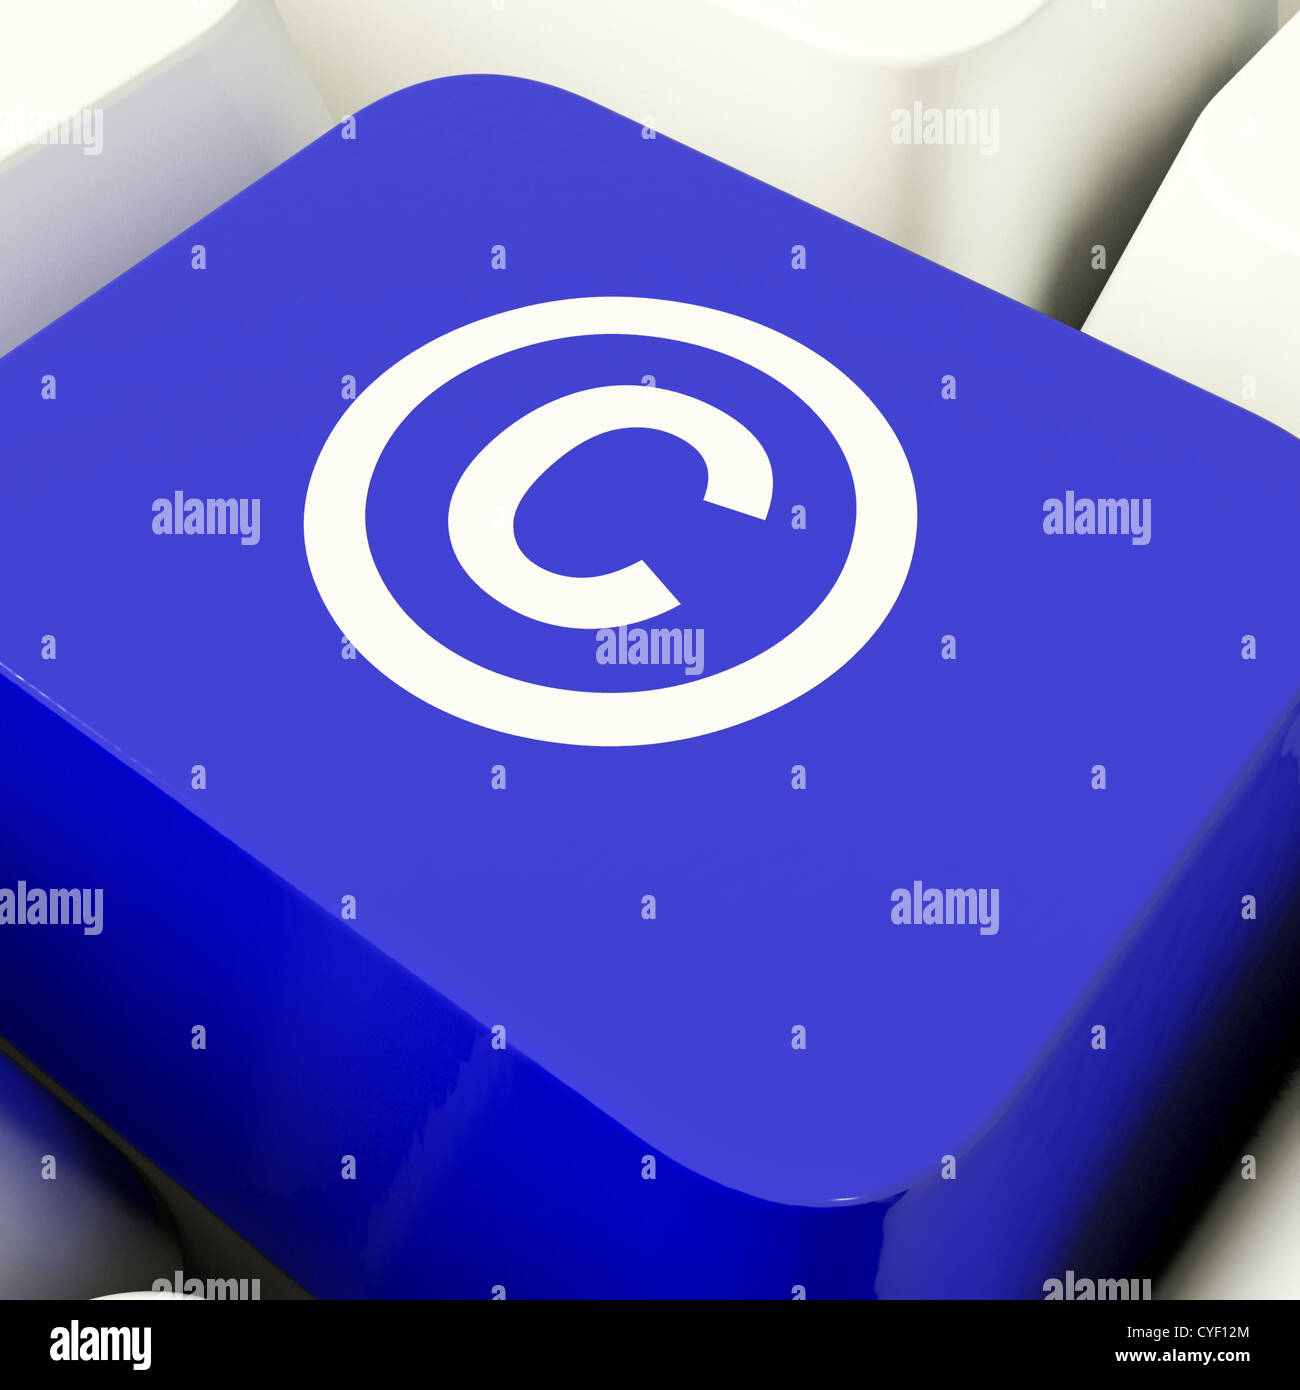 Copyright Computer Key In Blue Showing Patent Or Trademarks Stock Photo